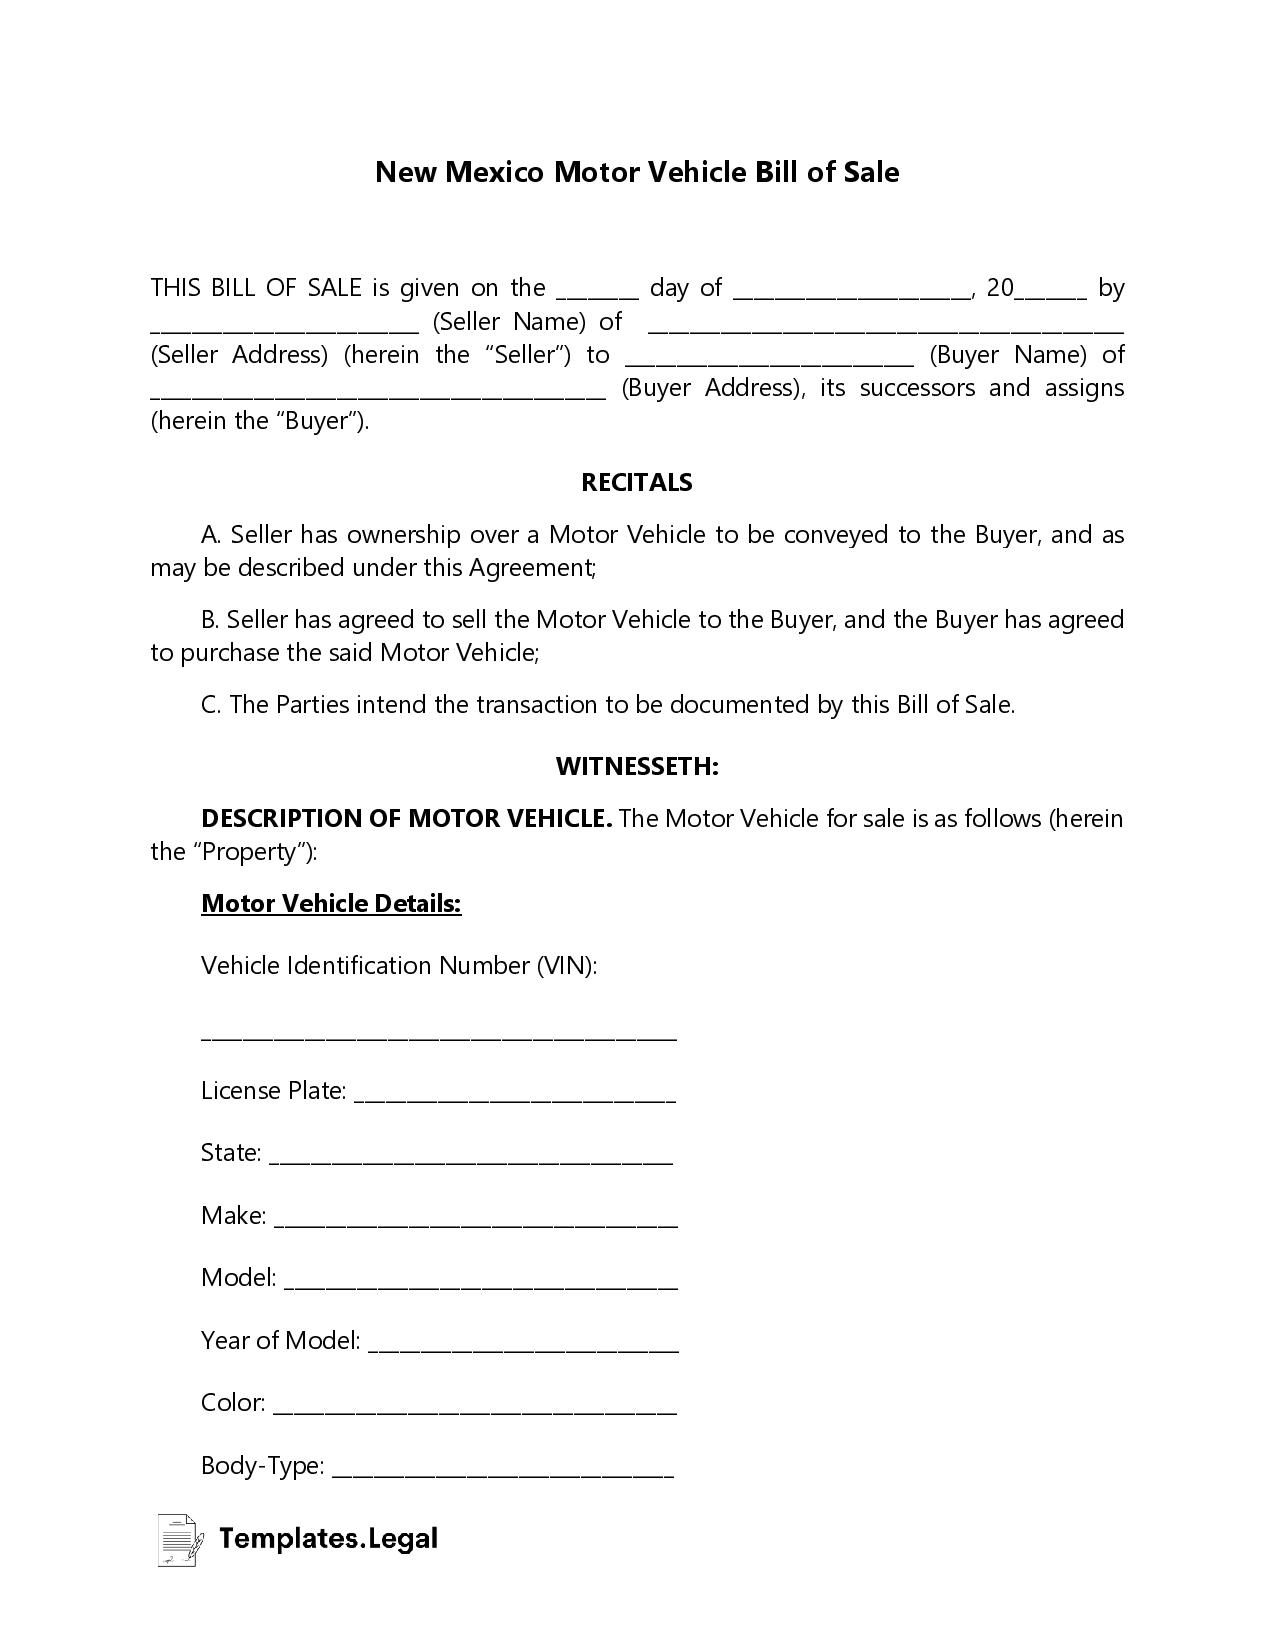 New Mexico Motor Vehicle Bill of Sale - Templates.Legal